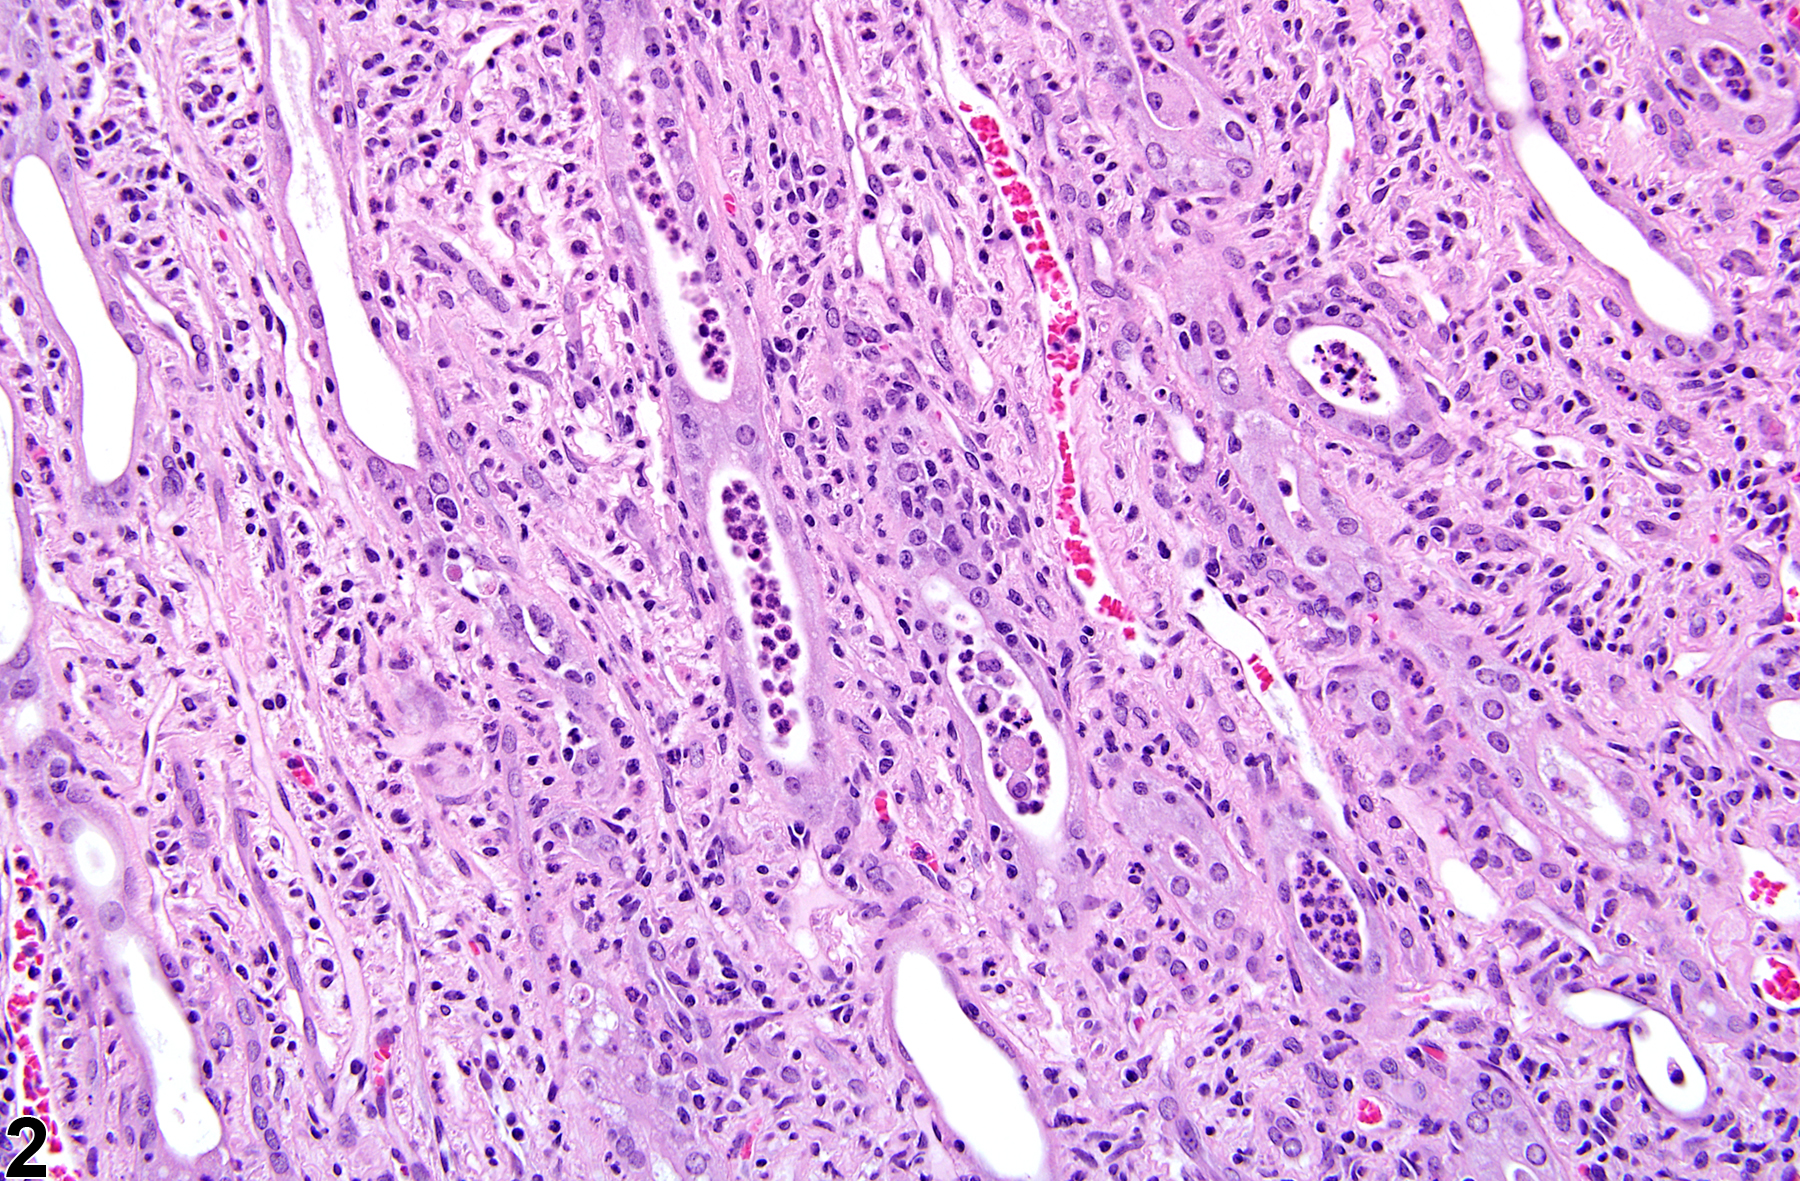 Image of inflammation, acute in the kidney from a female F344/N rat in a chronic study